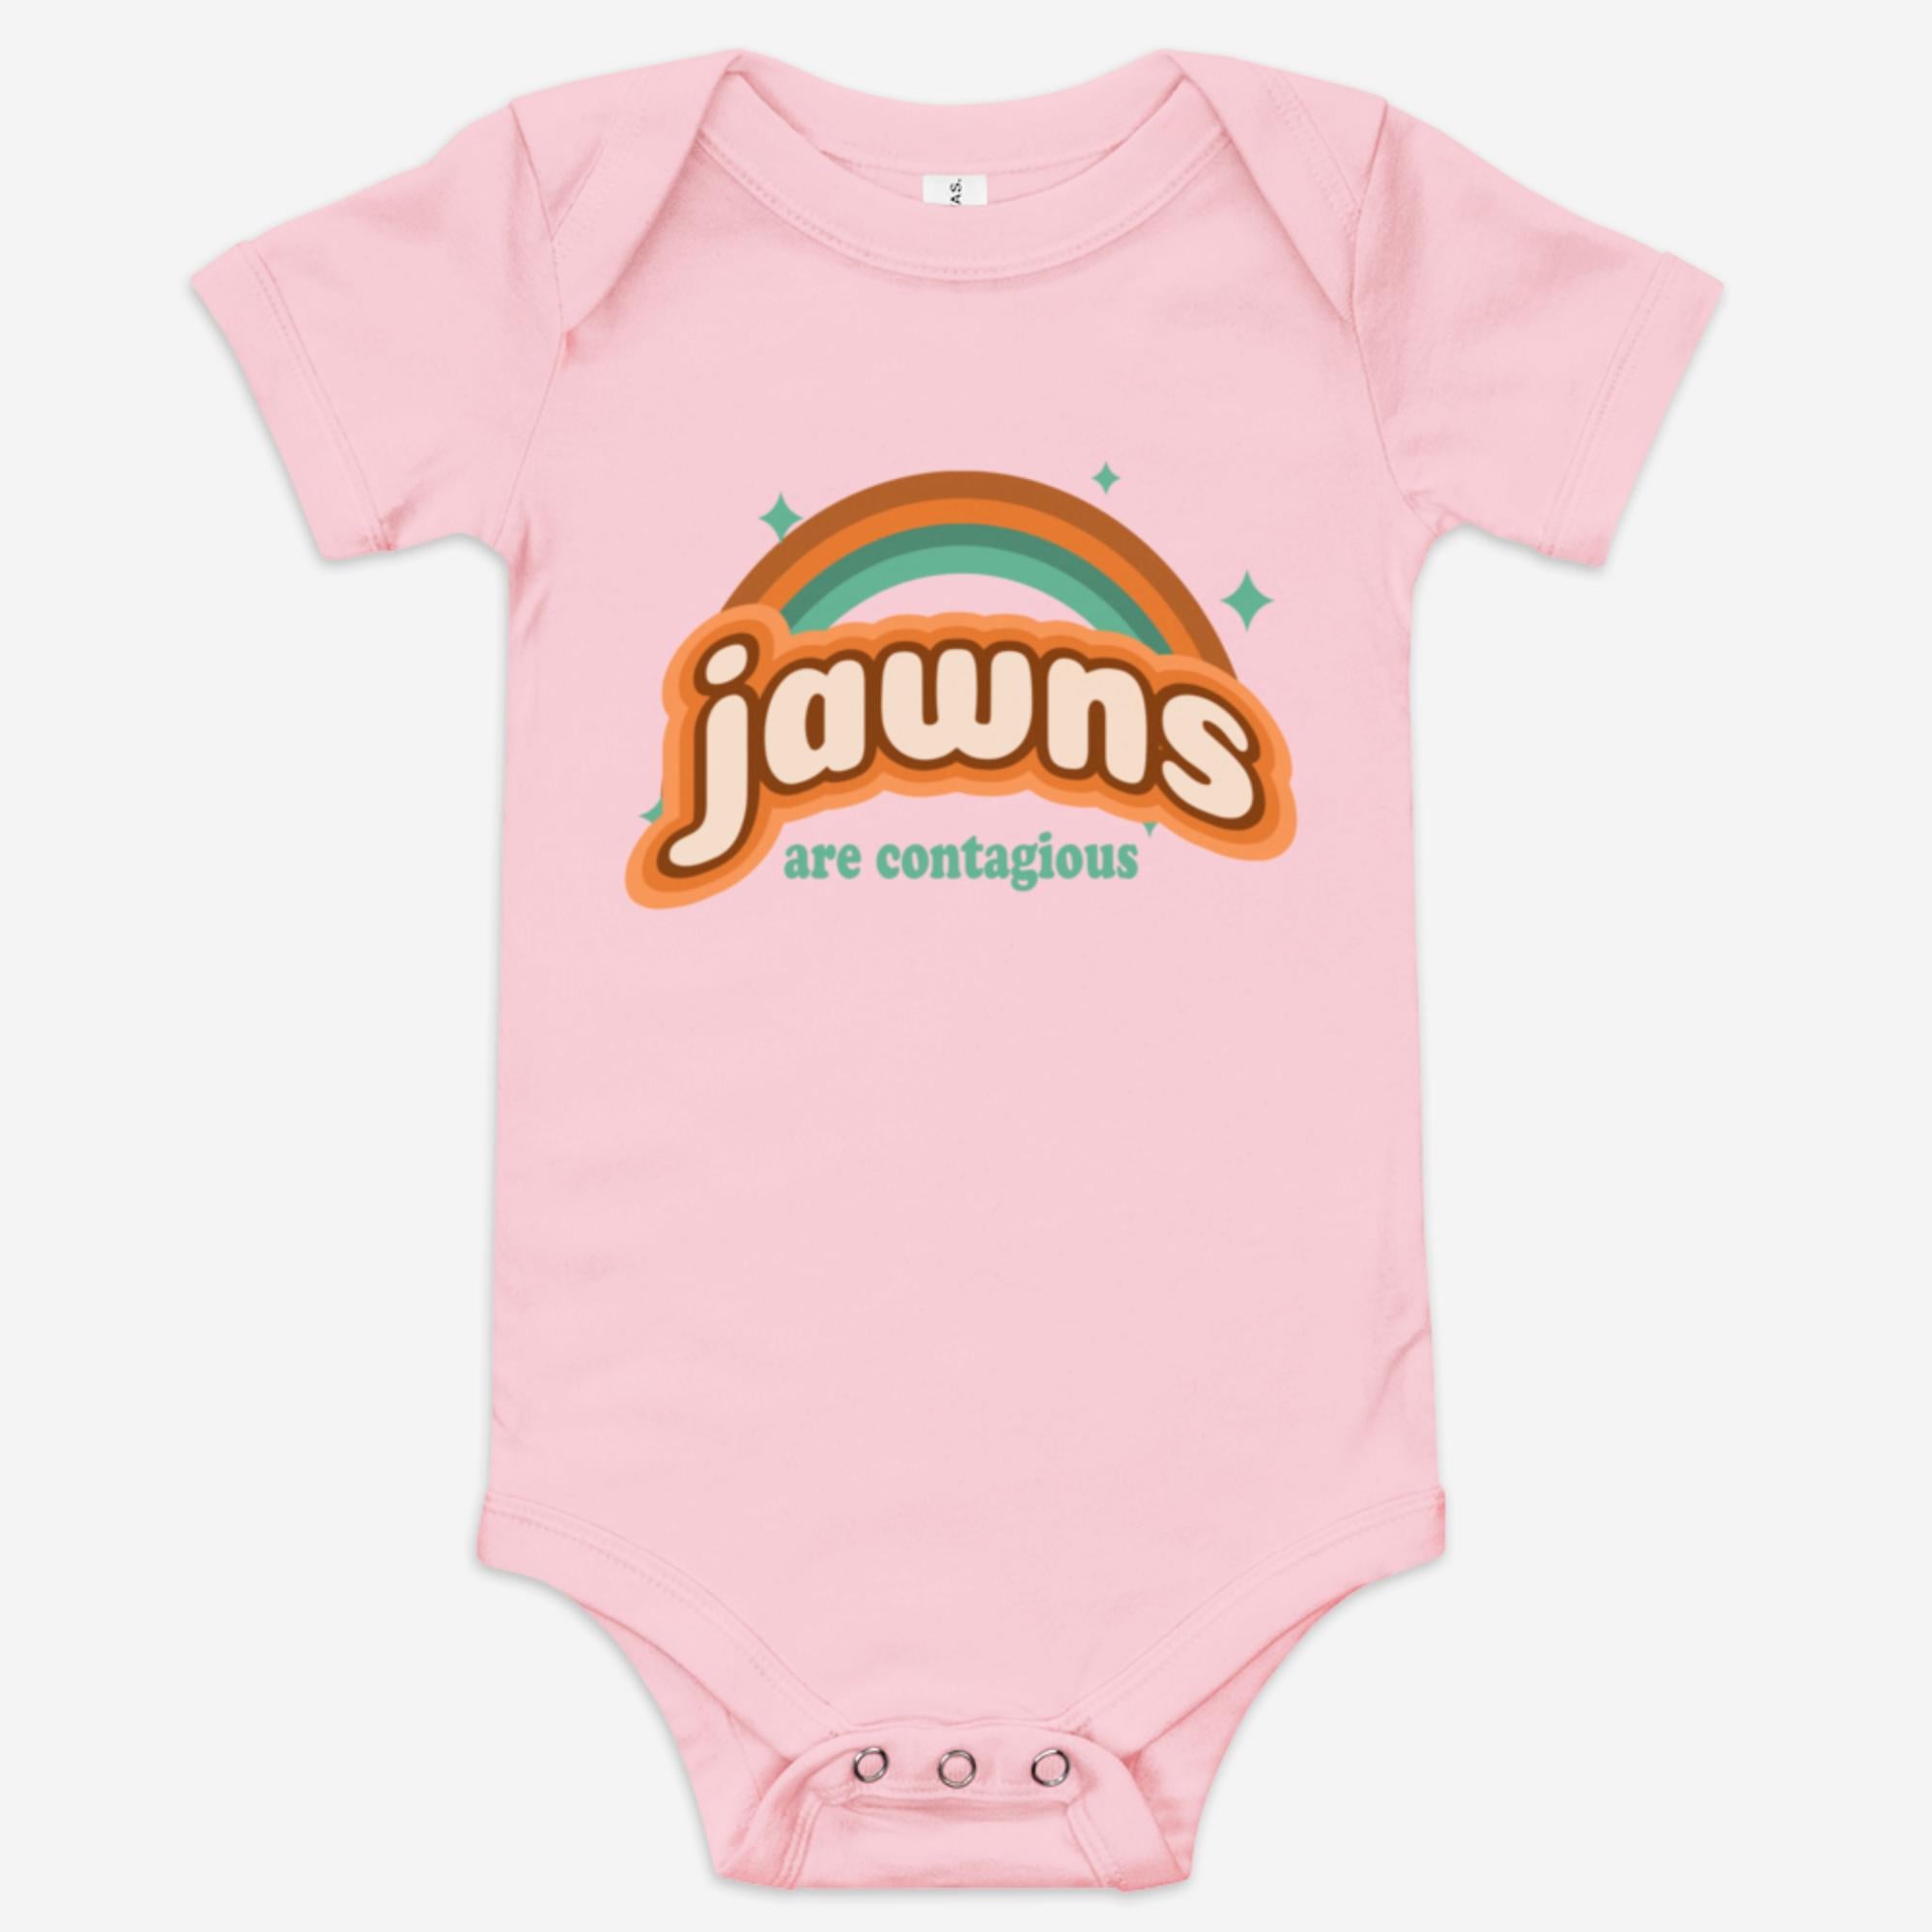 "Jawns Are Contagious" Baby Onesie